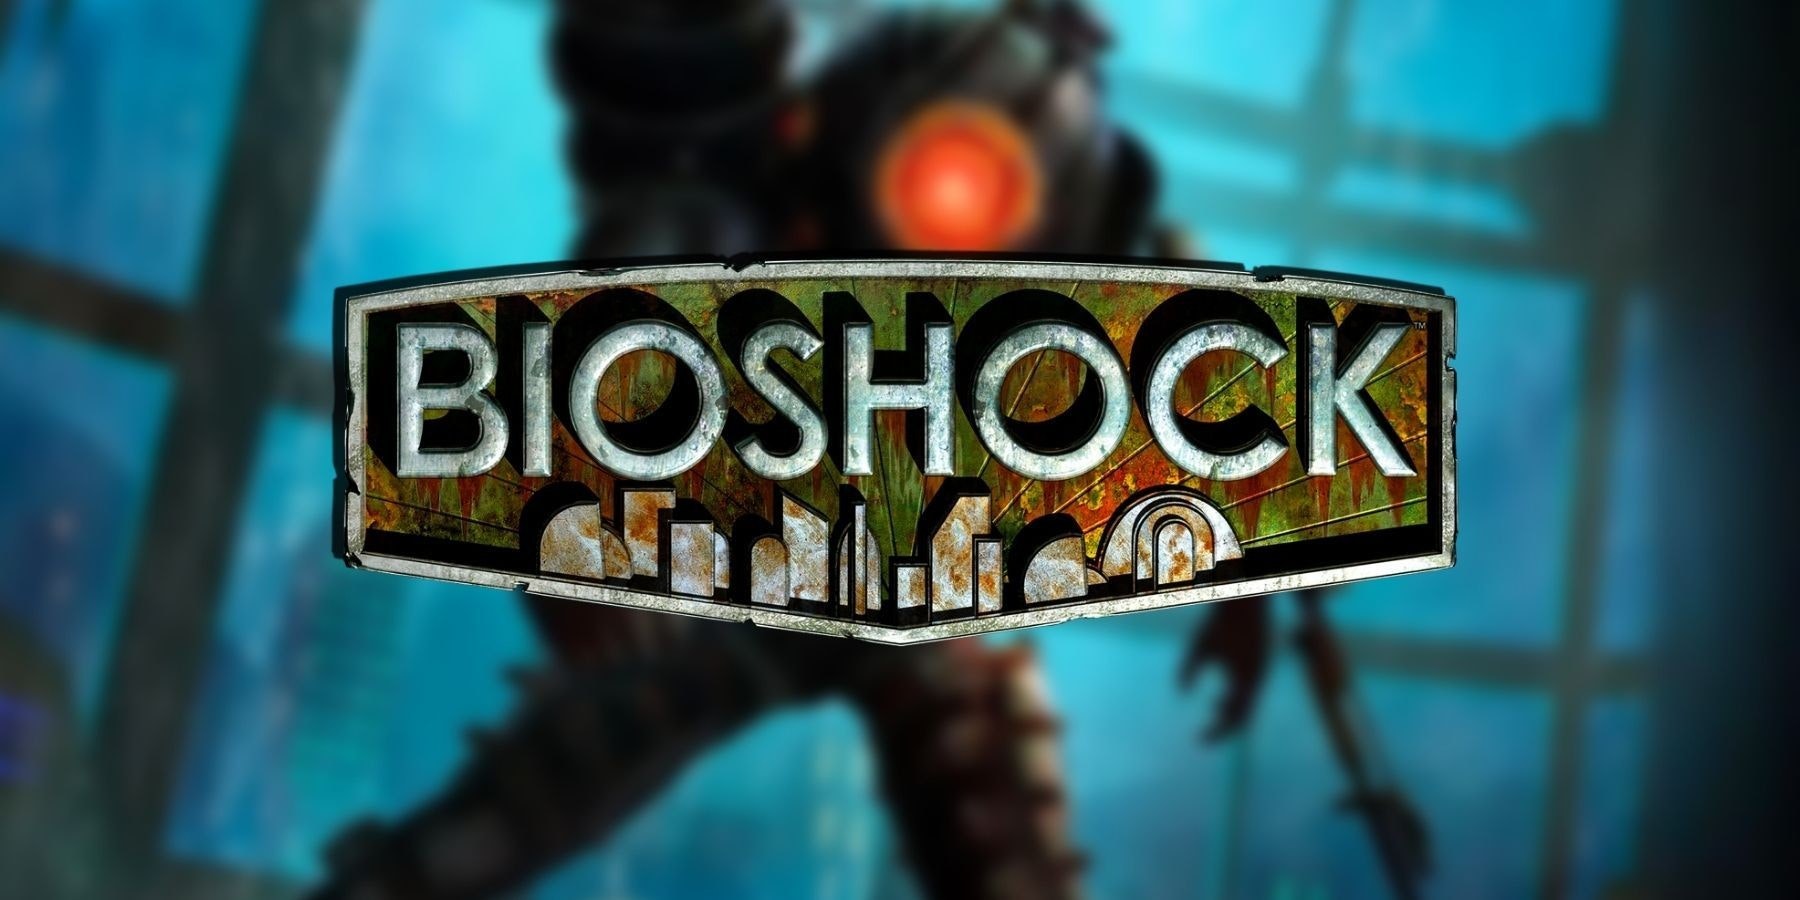 The photo mentioned BIOSHOCK, which is related to Ibstock, including BioShock Farmers Market, BioShock Unlimited, BioShock, BioShock: Ecstasy, Cloud Chamber